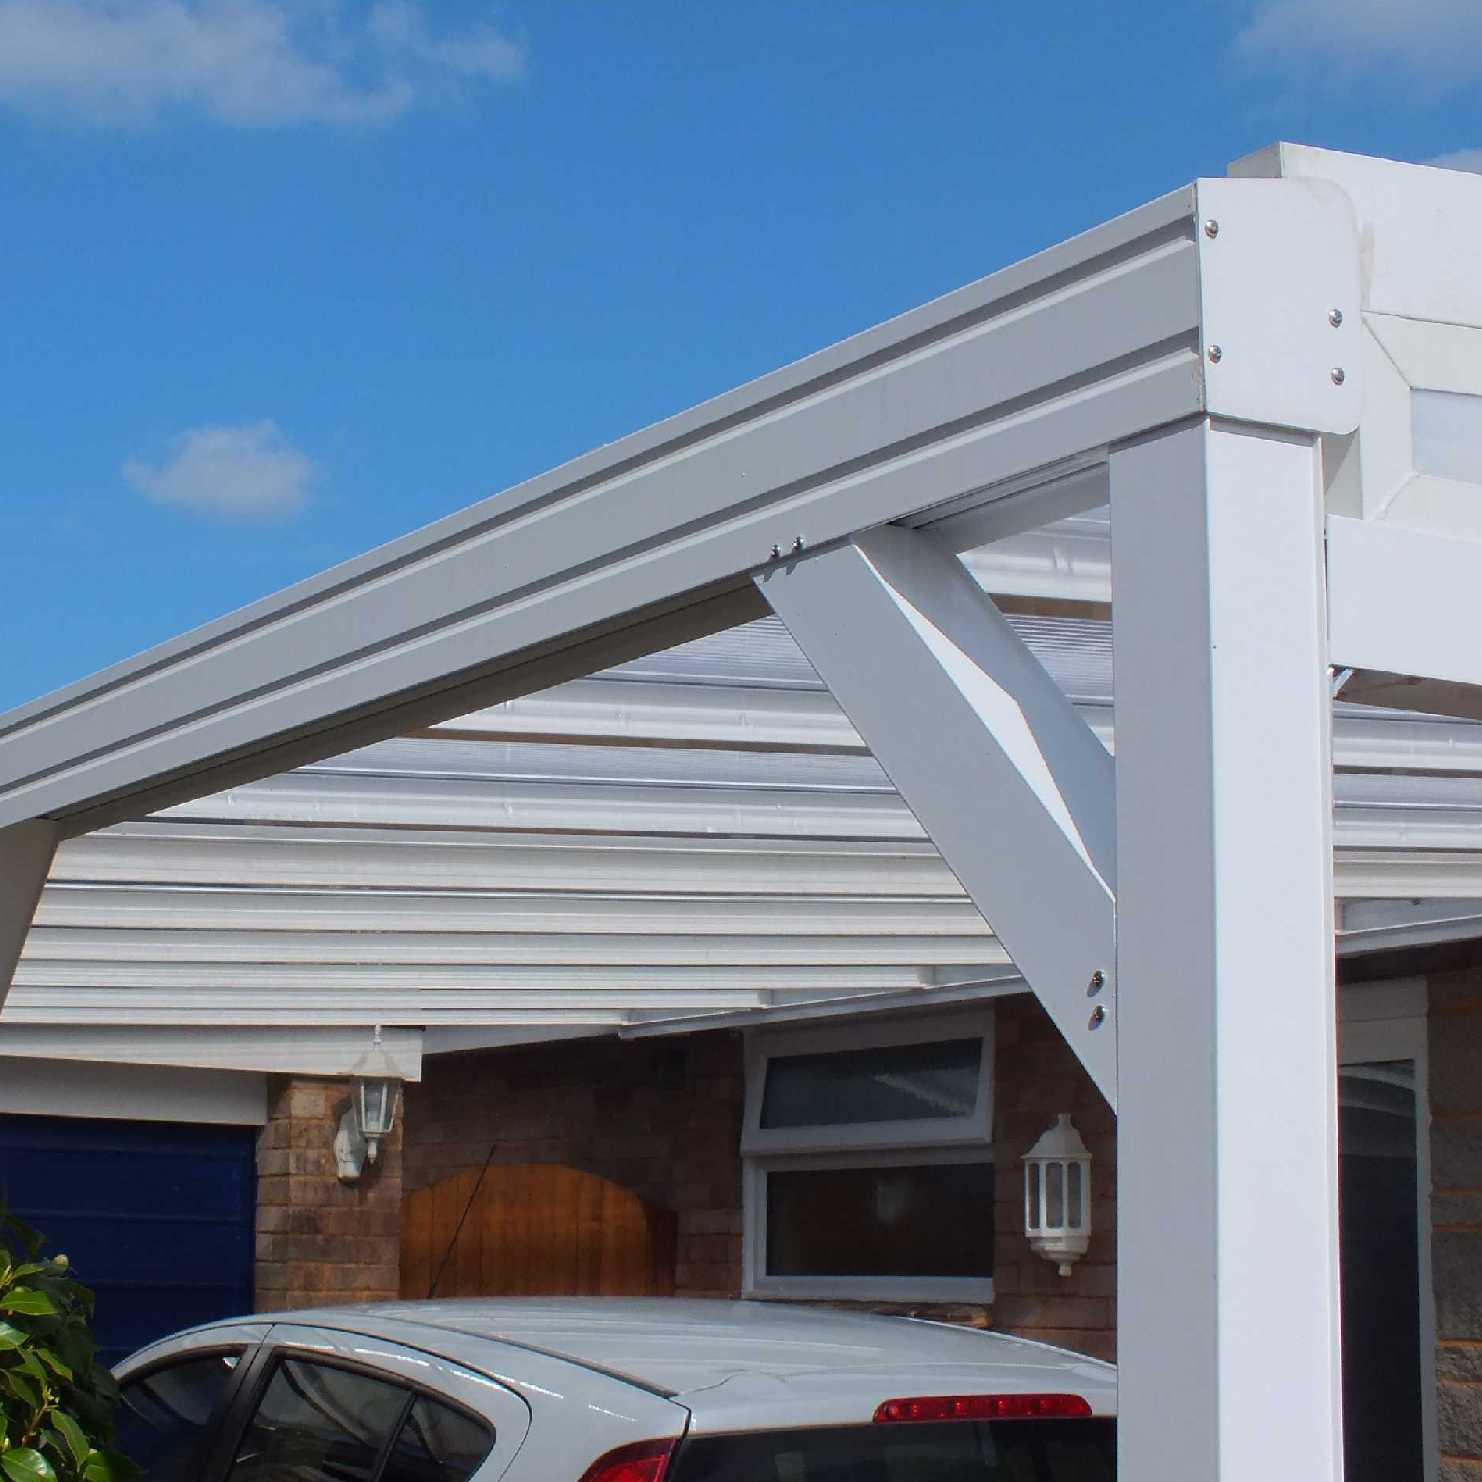 Buy Omega Smart Lean-To Canopy, White with 16mm Polycarbonate Glazing - 7.0m (W) x 4.5m (P), (4) Supporting Posts online today